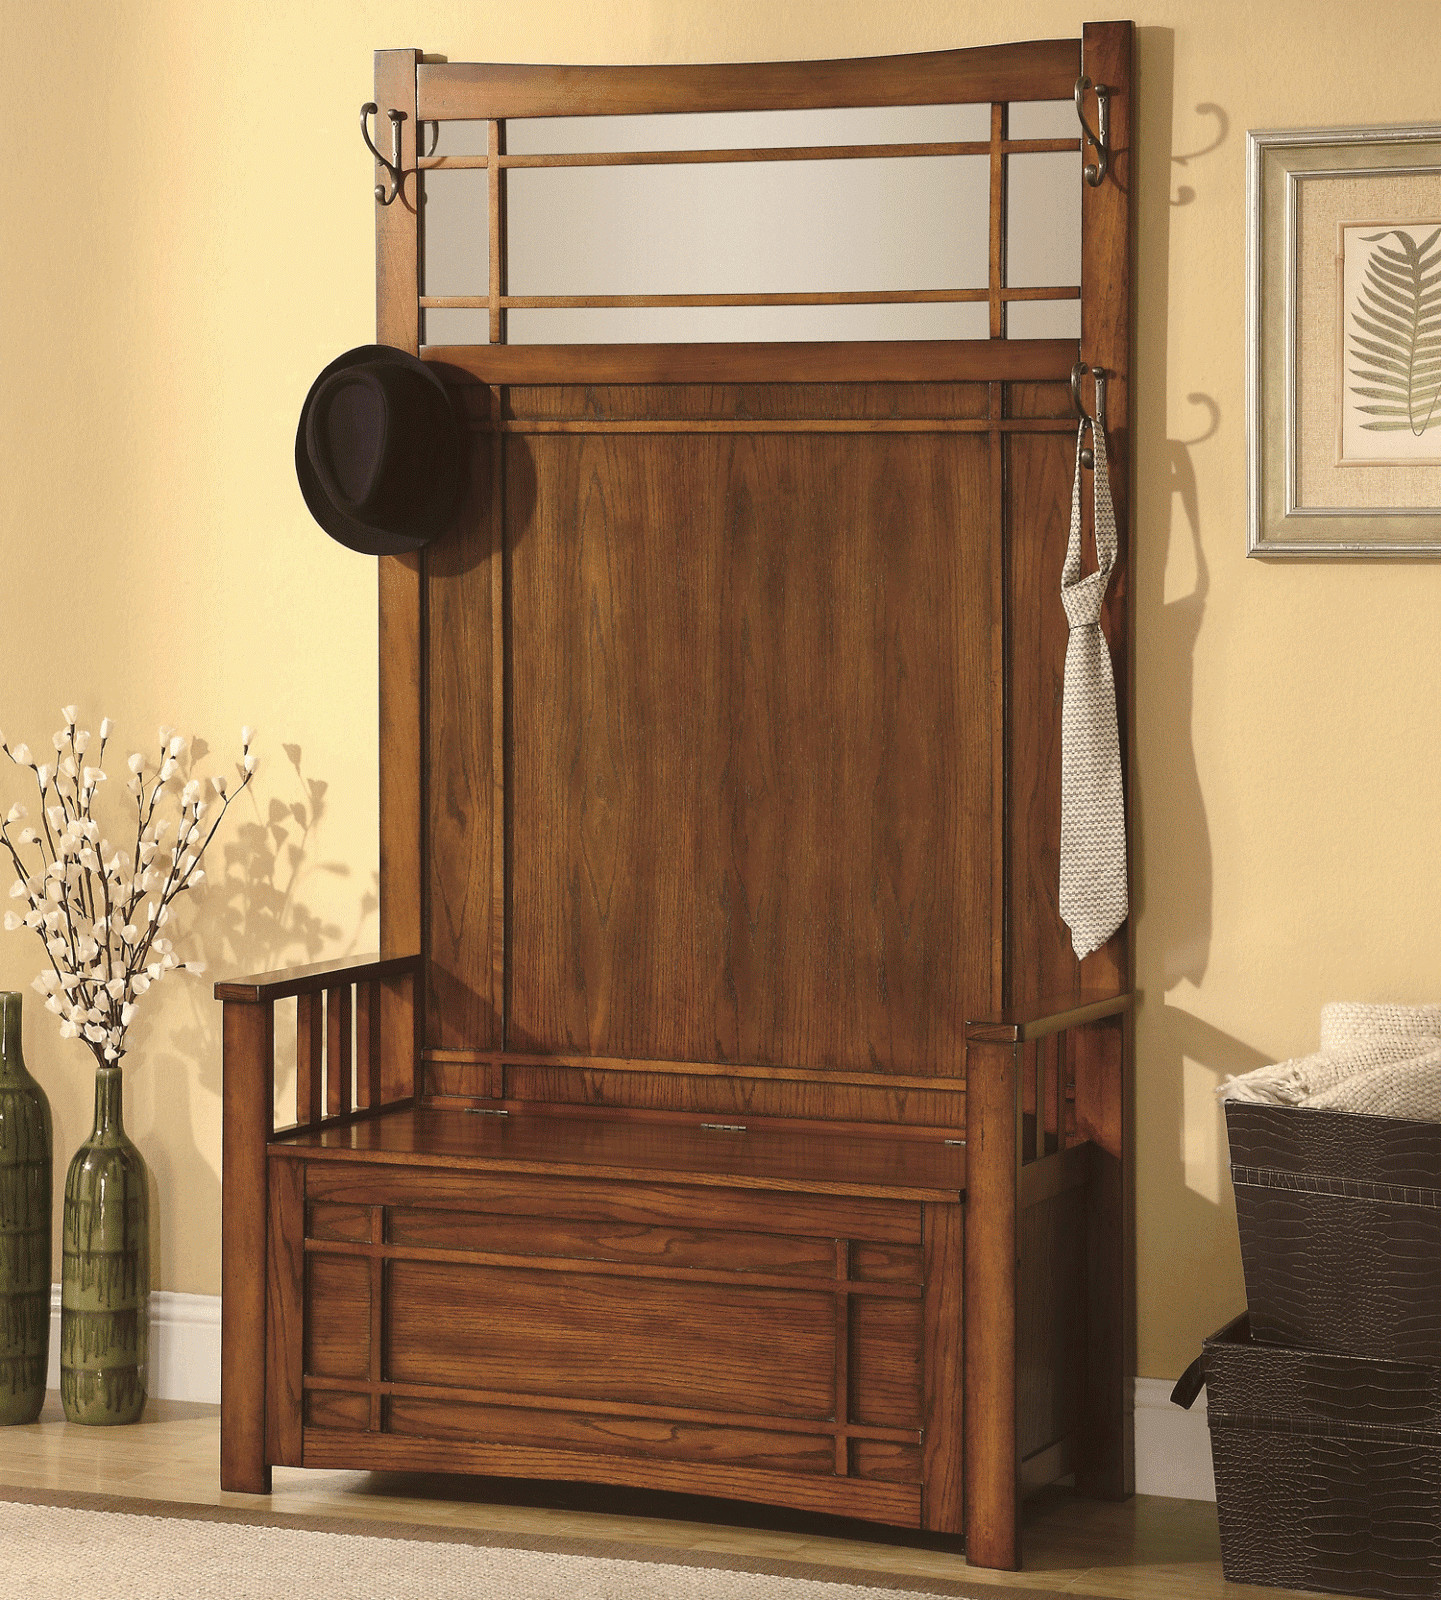 Coat Rack With Bench Storage
 Simple Review About Living Room Furniture Entryway